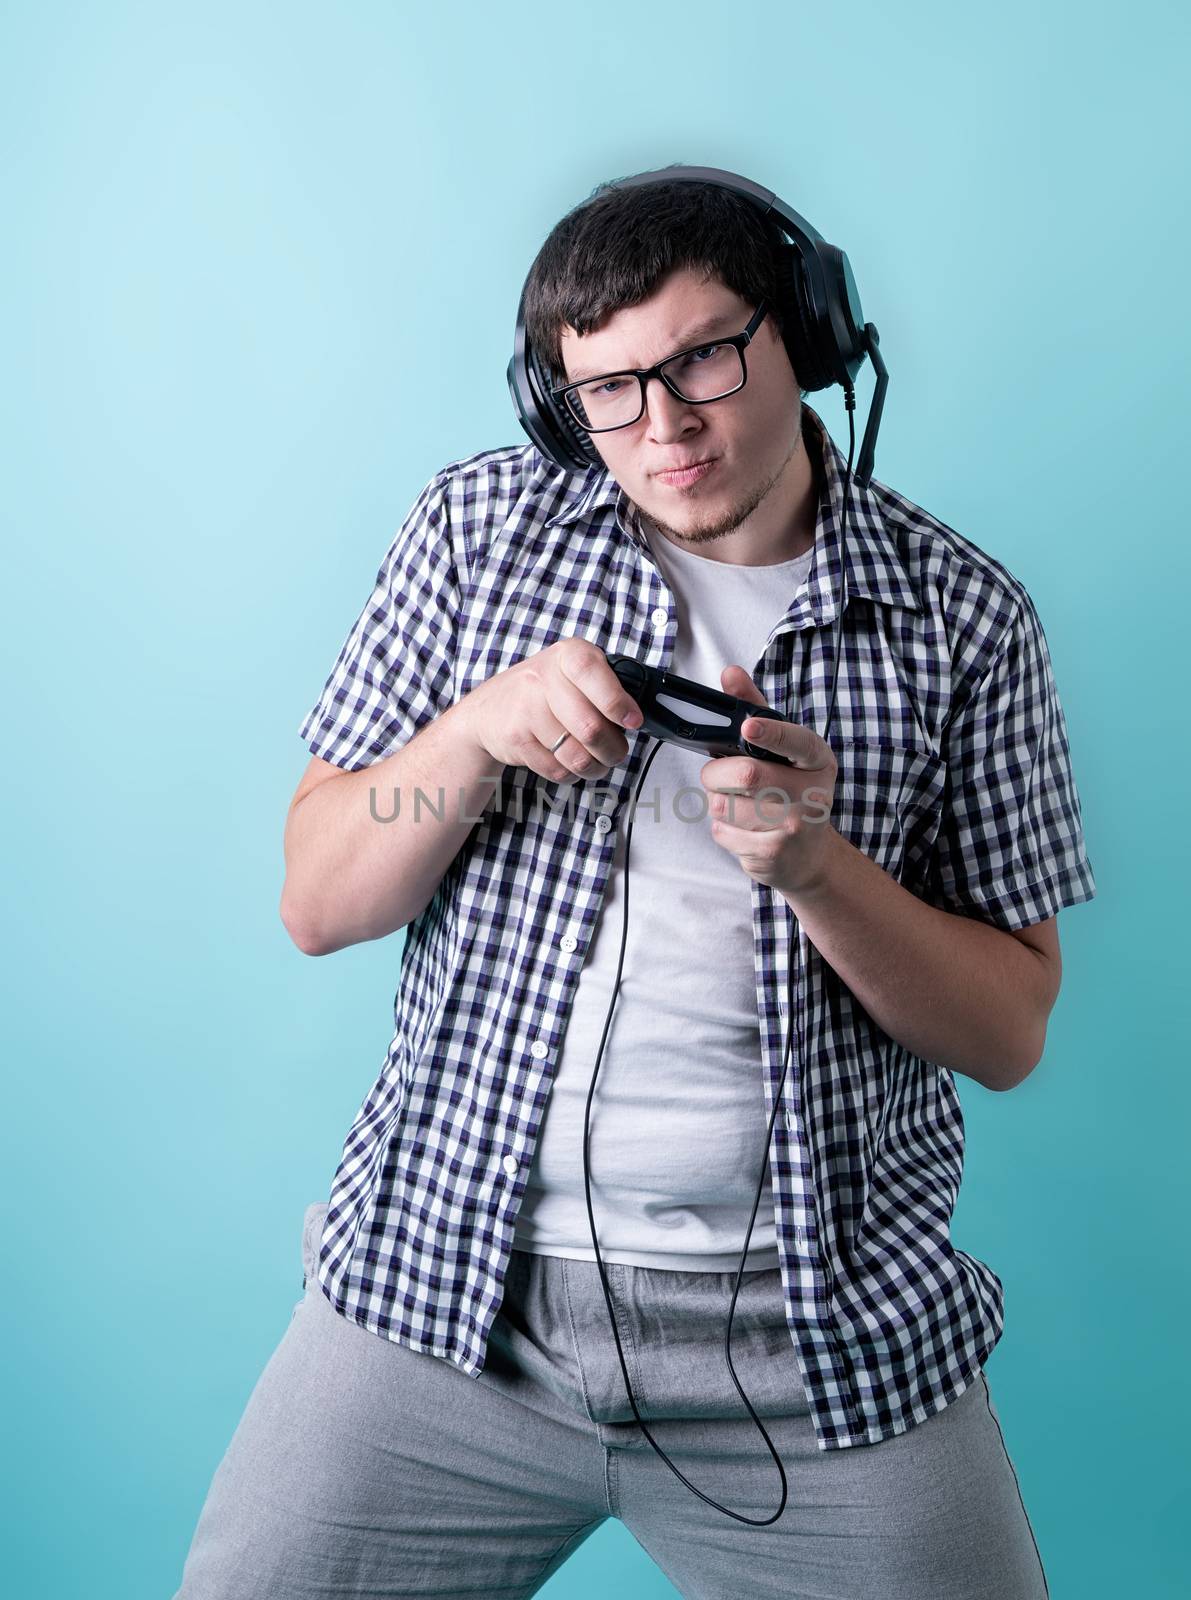 Funny young man playing video games holding a joystick isolated on blue background by Desperada